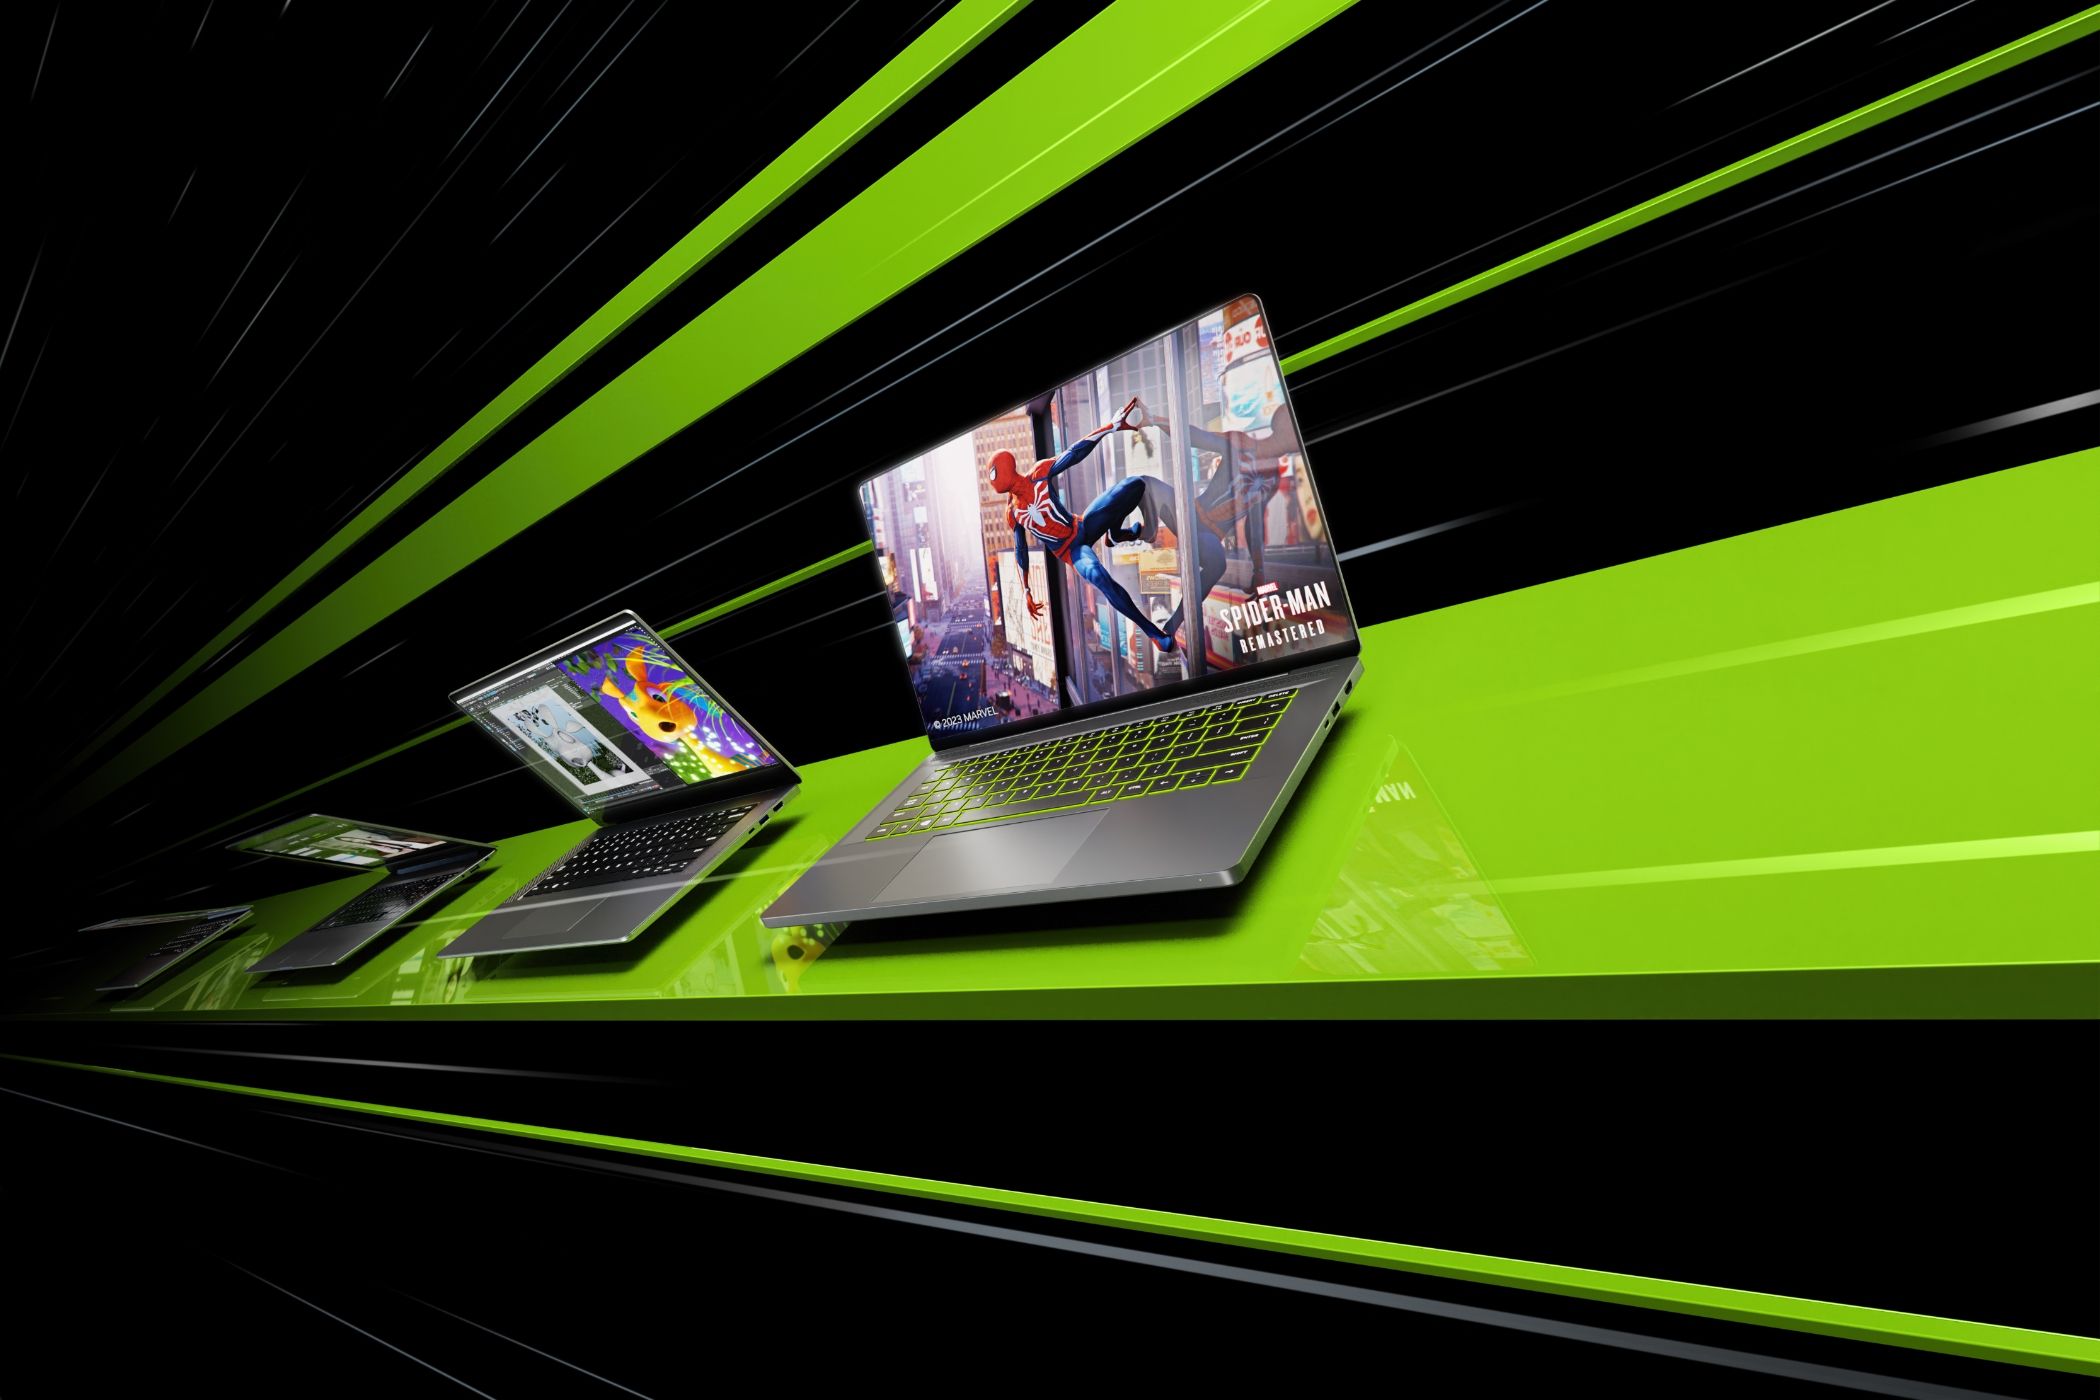 Nvidia 40 series laptops on green stripes on a black background